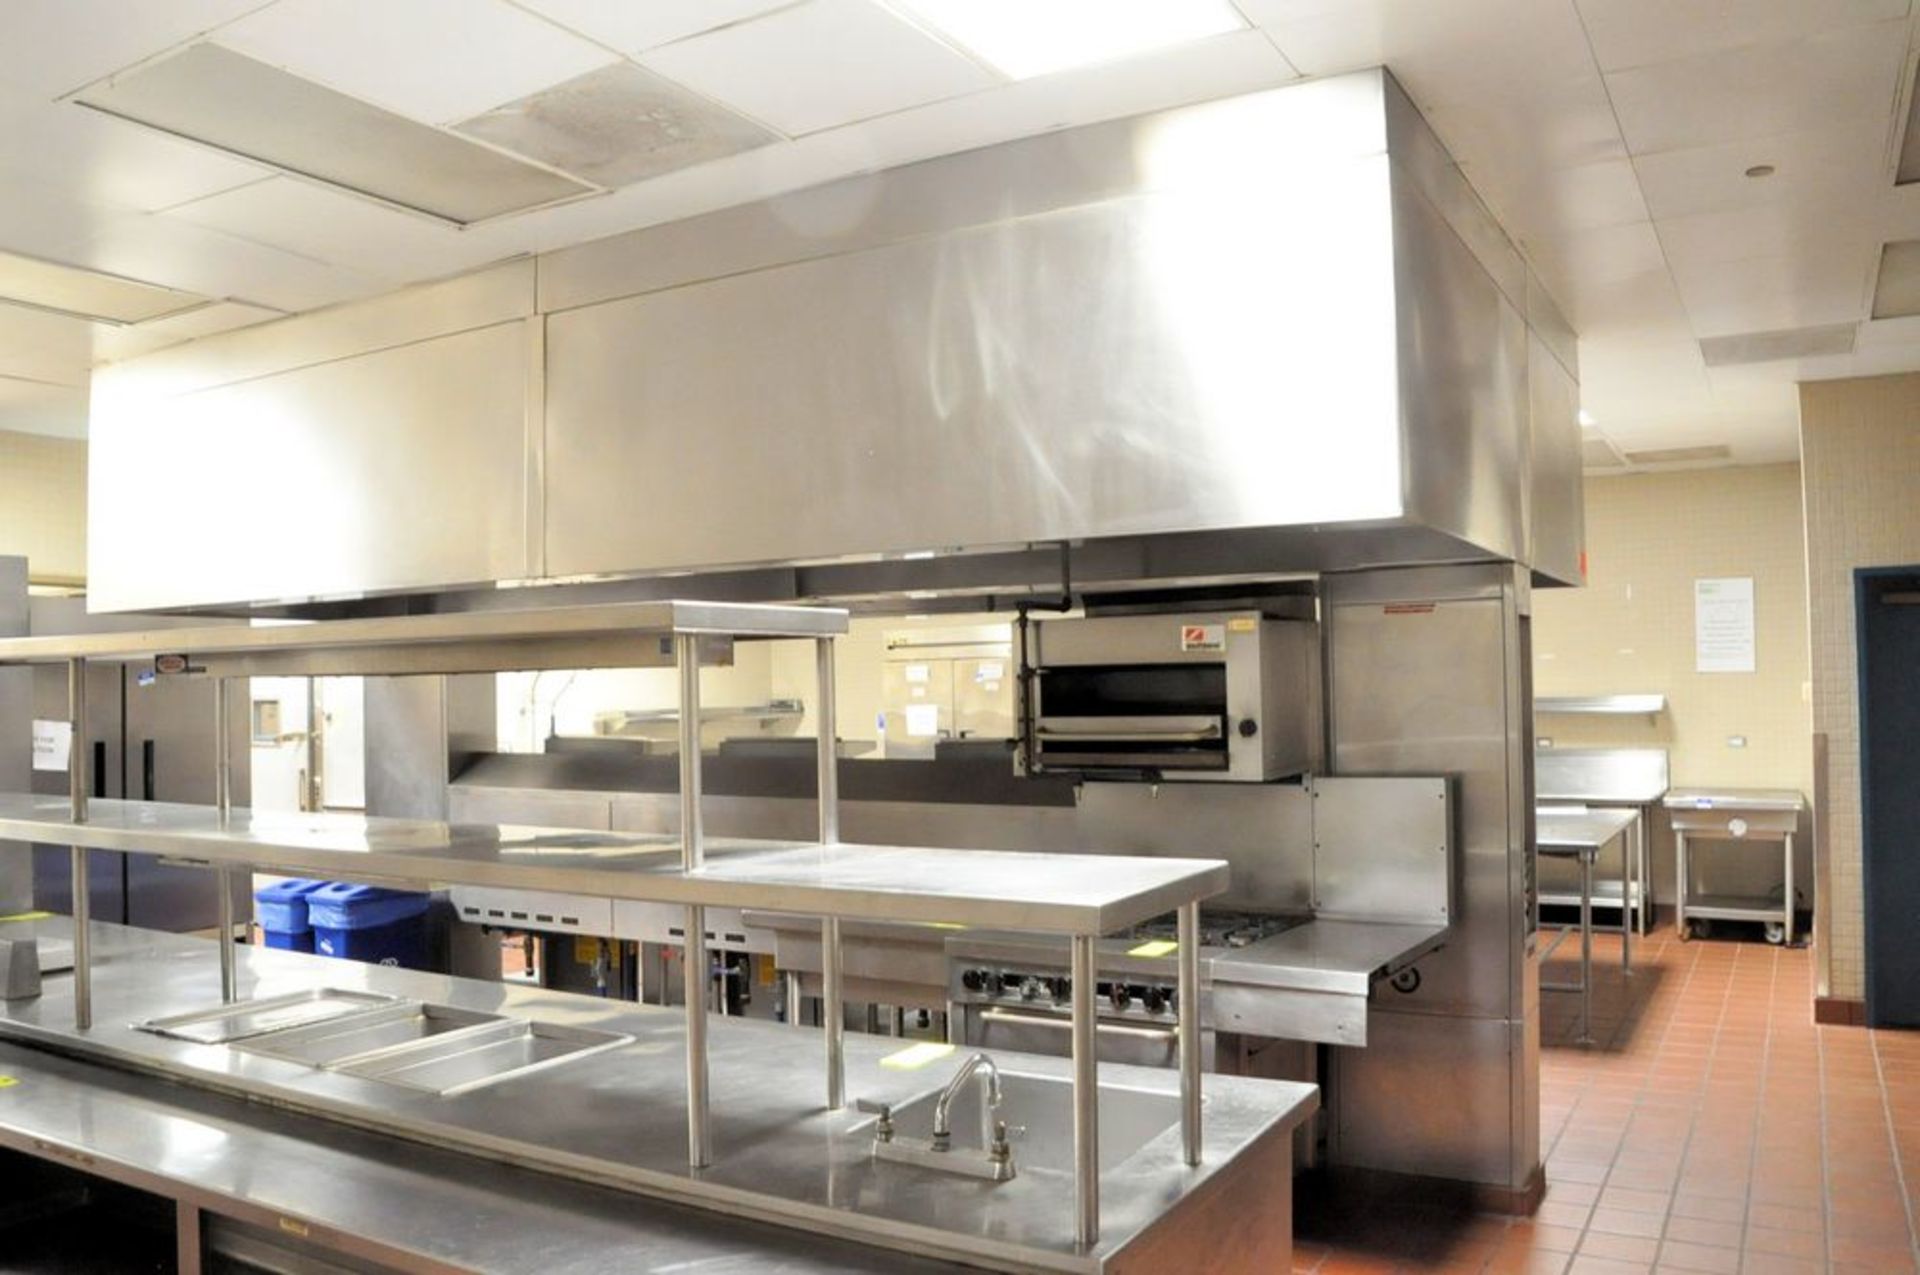 Stainless Steel 10' x 18' Exhaust Hood with Fire Suppression, (Main Kitchen Area-Back Kitchen), (1st - Image 3 of 7